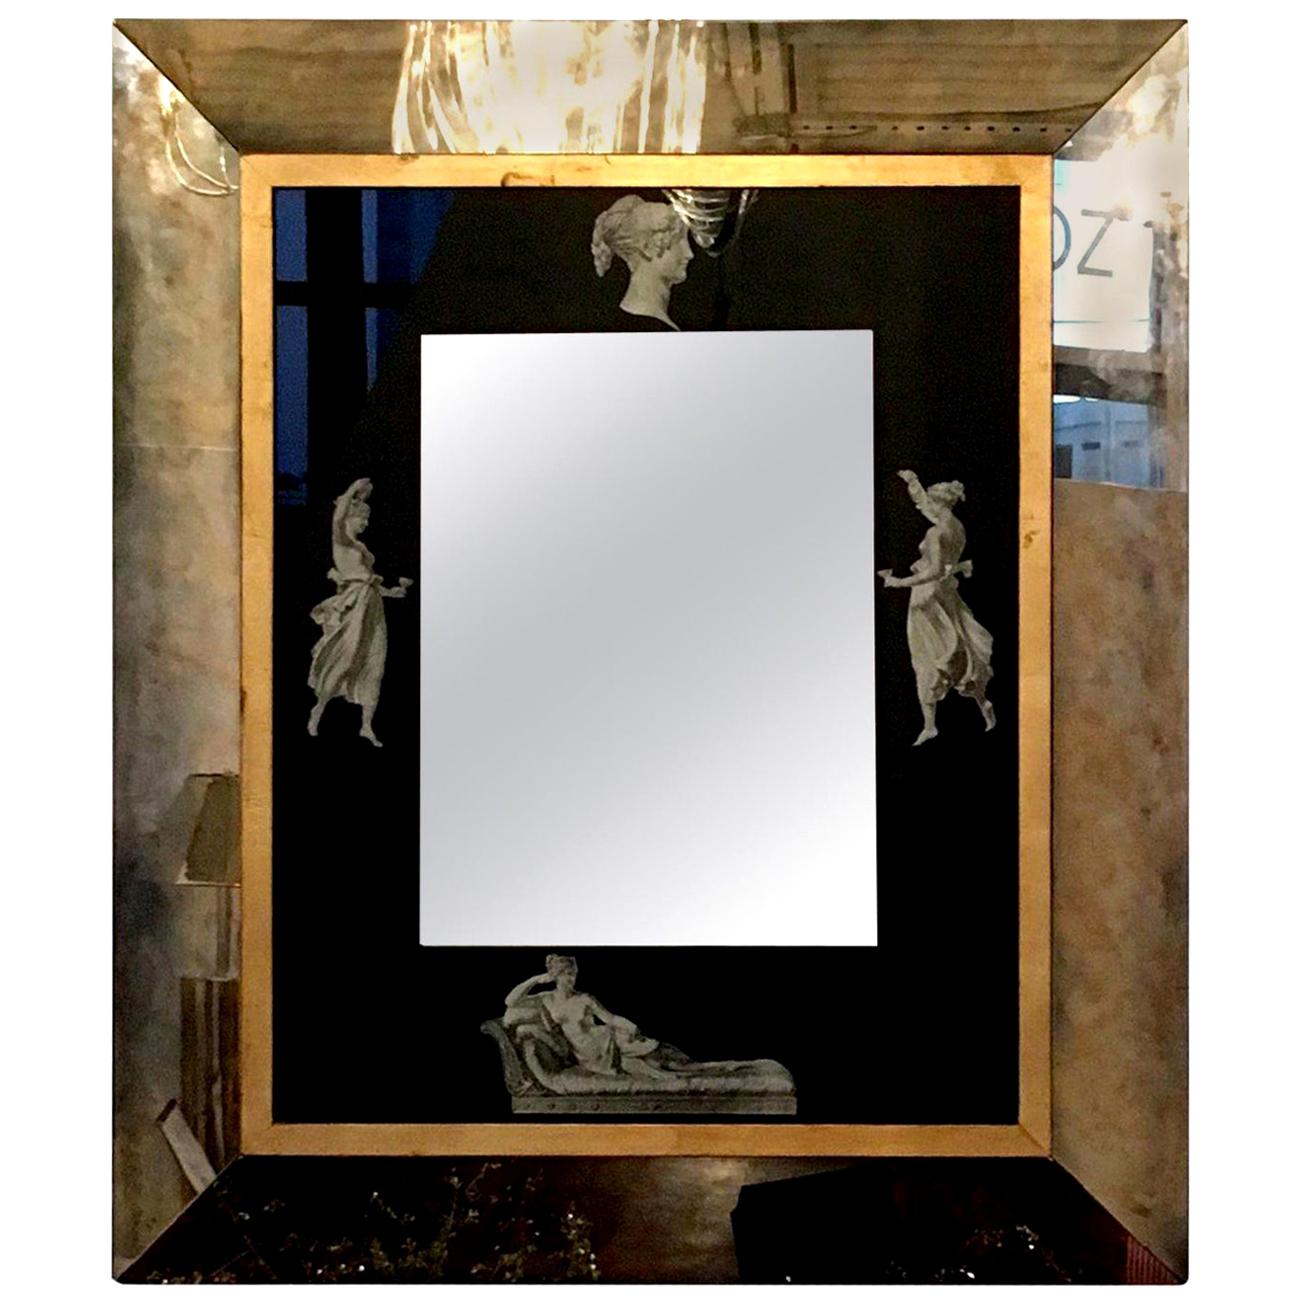 Offered is a Mid-Century Modern Italian black, gold and white Grecian figures neoclassical antiqued mirror with substantial wood back and hanging mechanism. This piece has been manufactured by using a method referred to as 